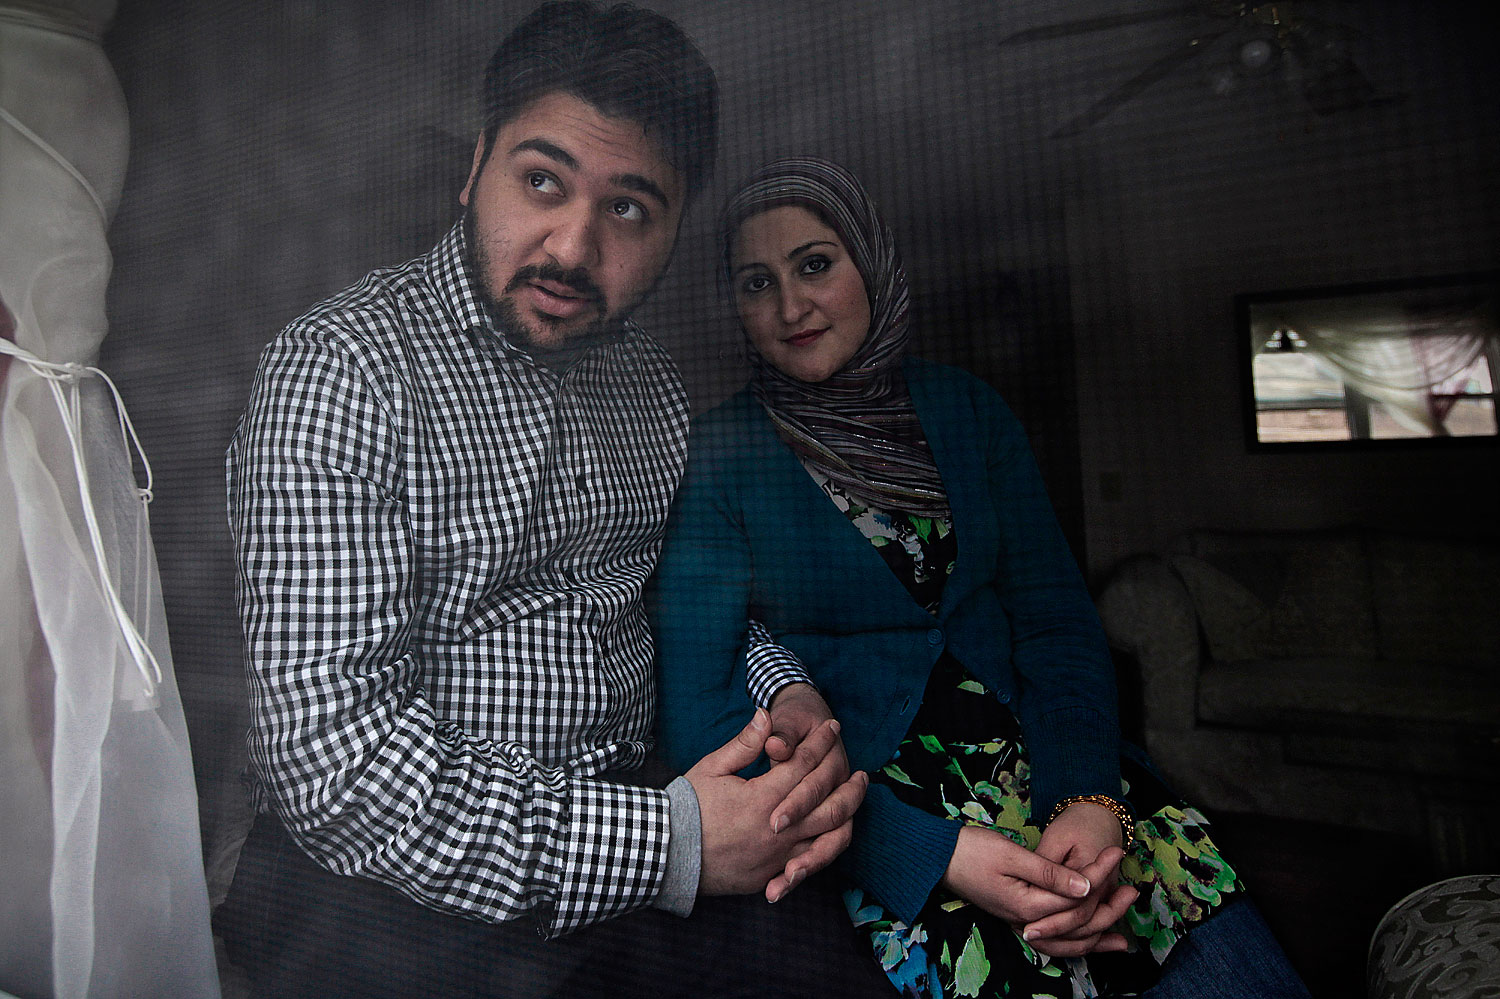 Ahmad Safi and his wife Deeba spend time together at their home in St. Joseph, Mo., March 6, 2010. The couple has been working with other Muslim families to establish the first Mosque in St. Joseph and say they have faced significant resistance from the local non-Muslim community members.